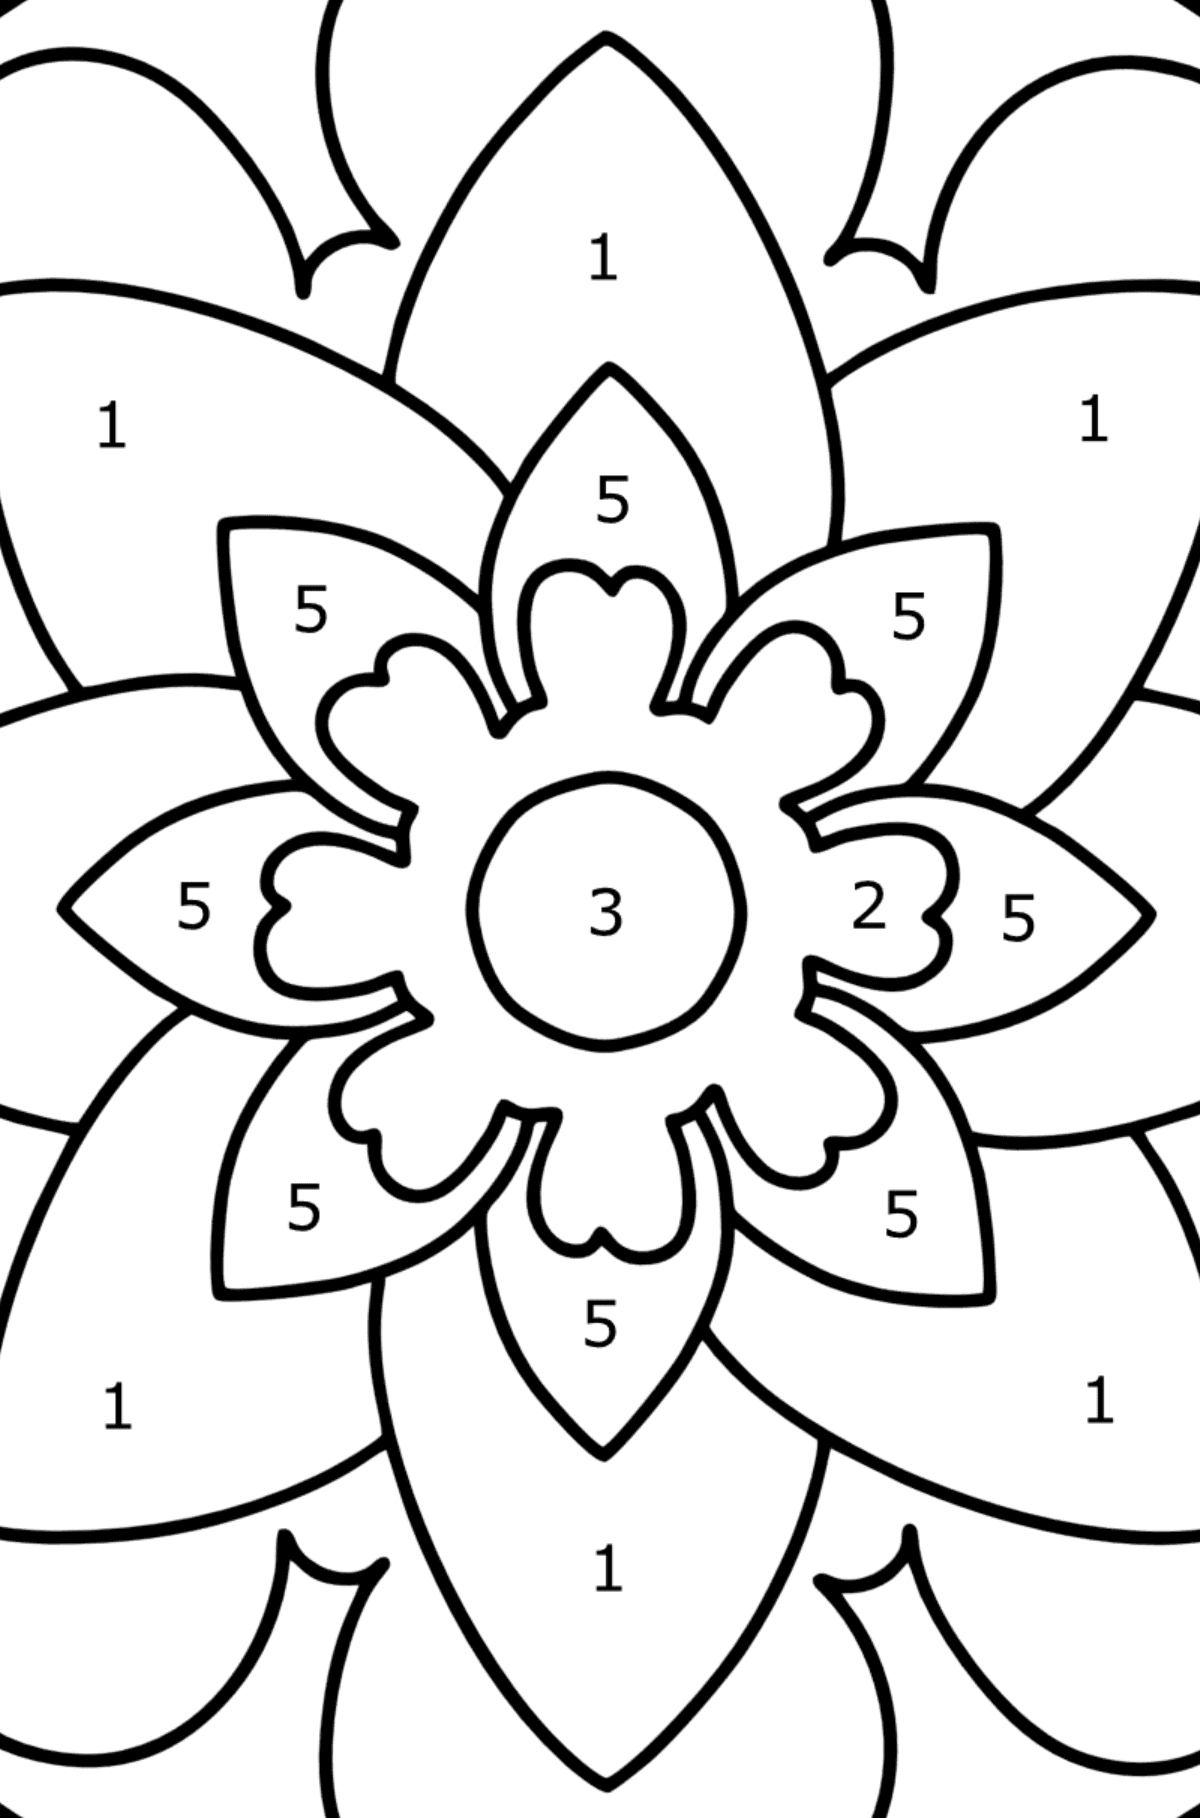 Mandala coloring page - 20 elements - Coloring by Numbers for Kids